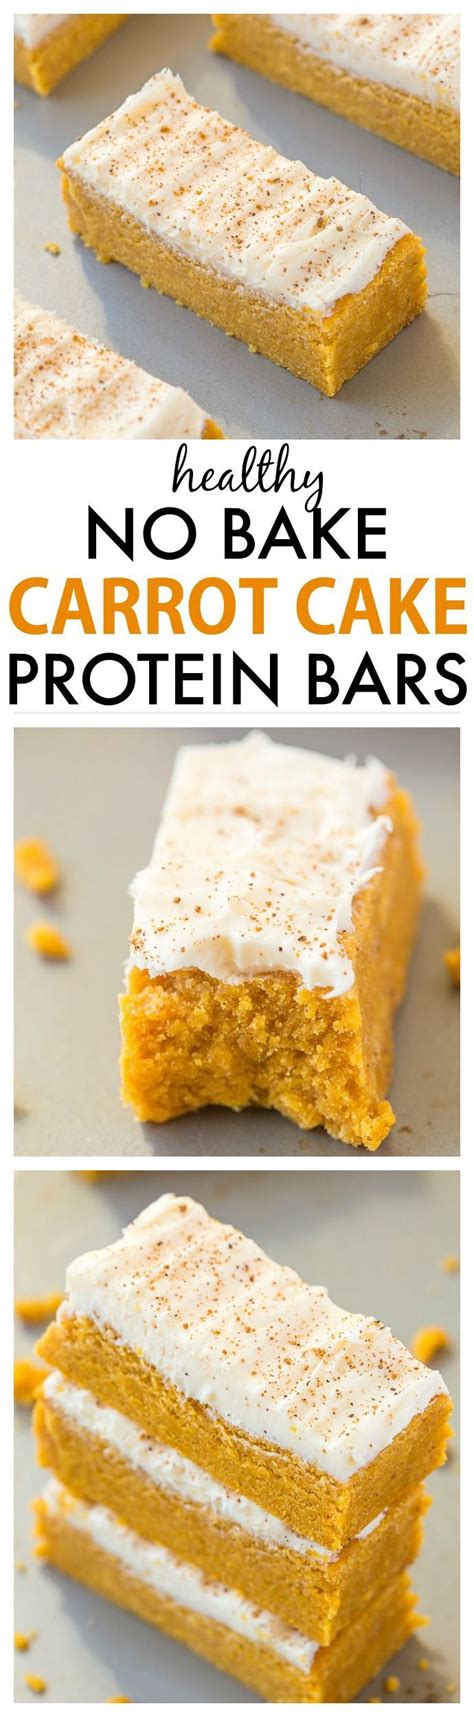 Healthy No Bake Carrot Cake Protein Bars A Delicious Recipe Which